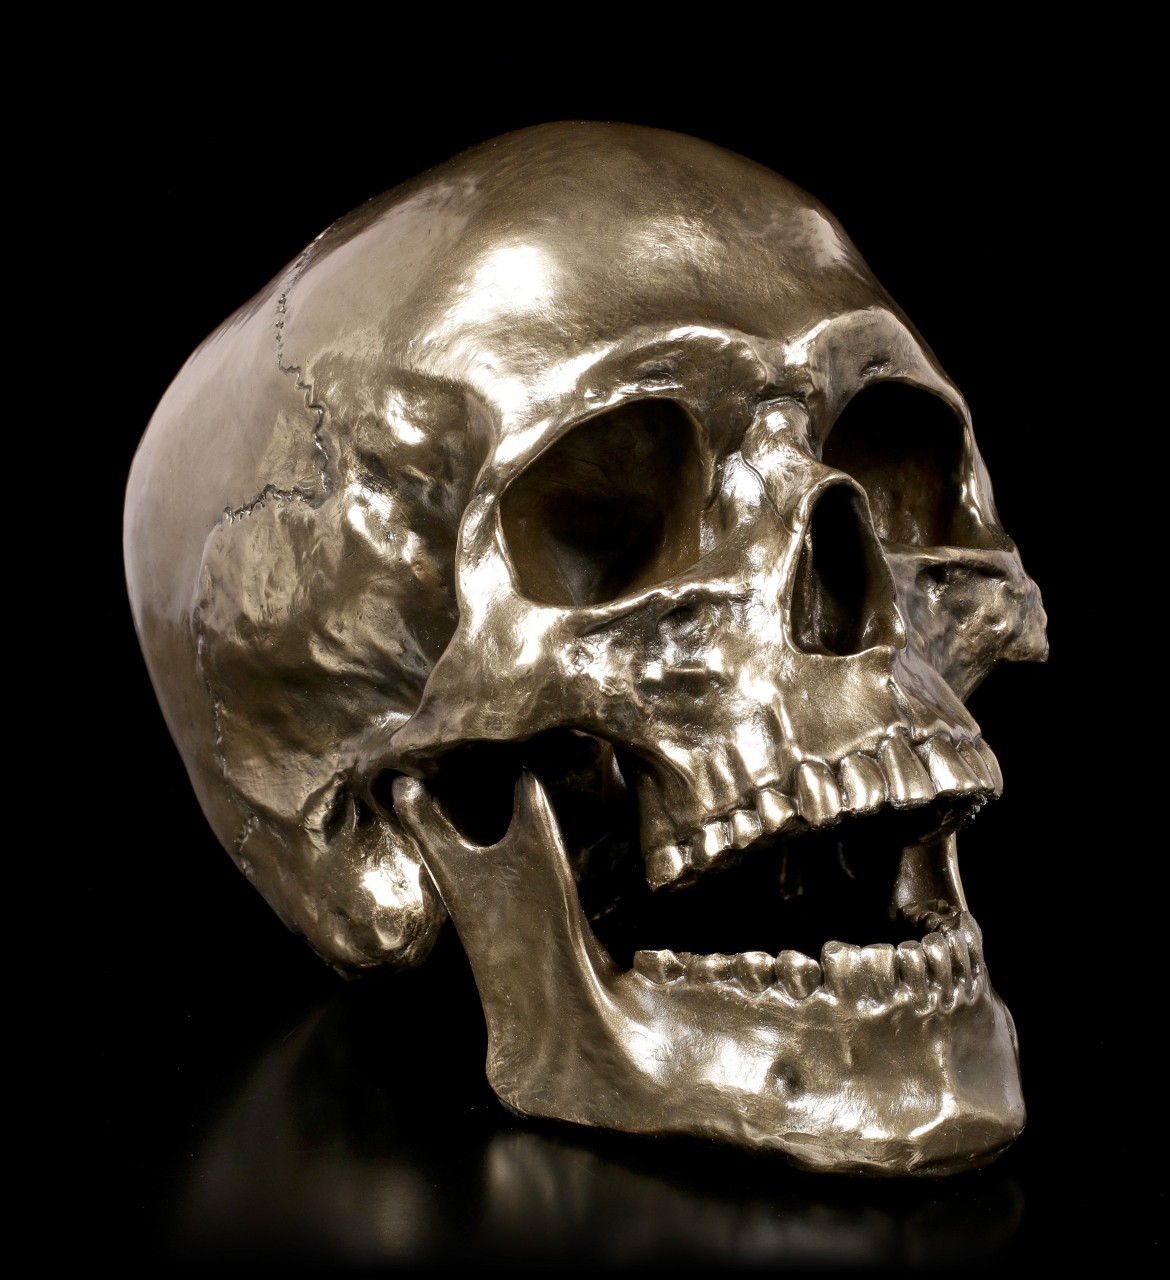 Skull with movable Jaw - Cranius